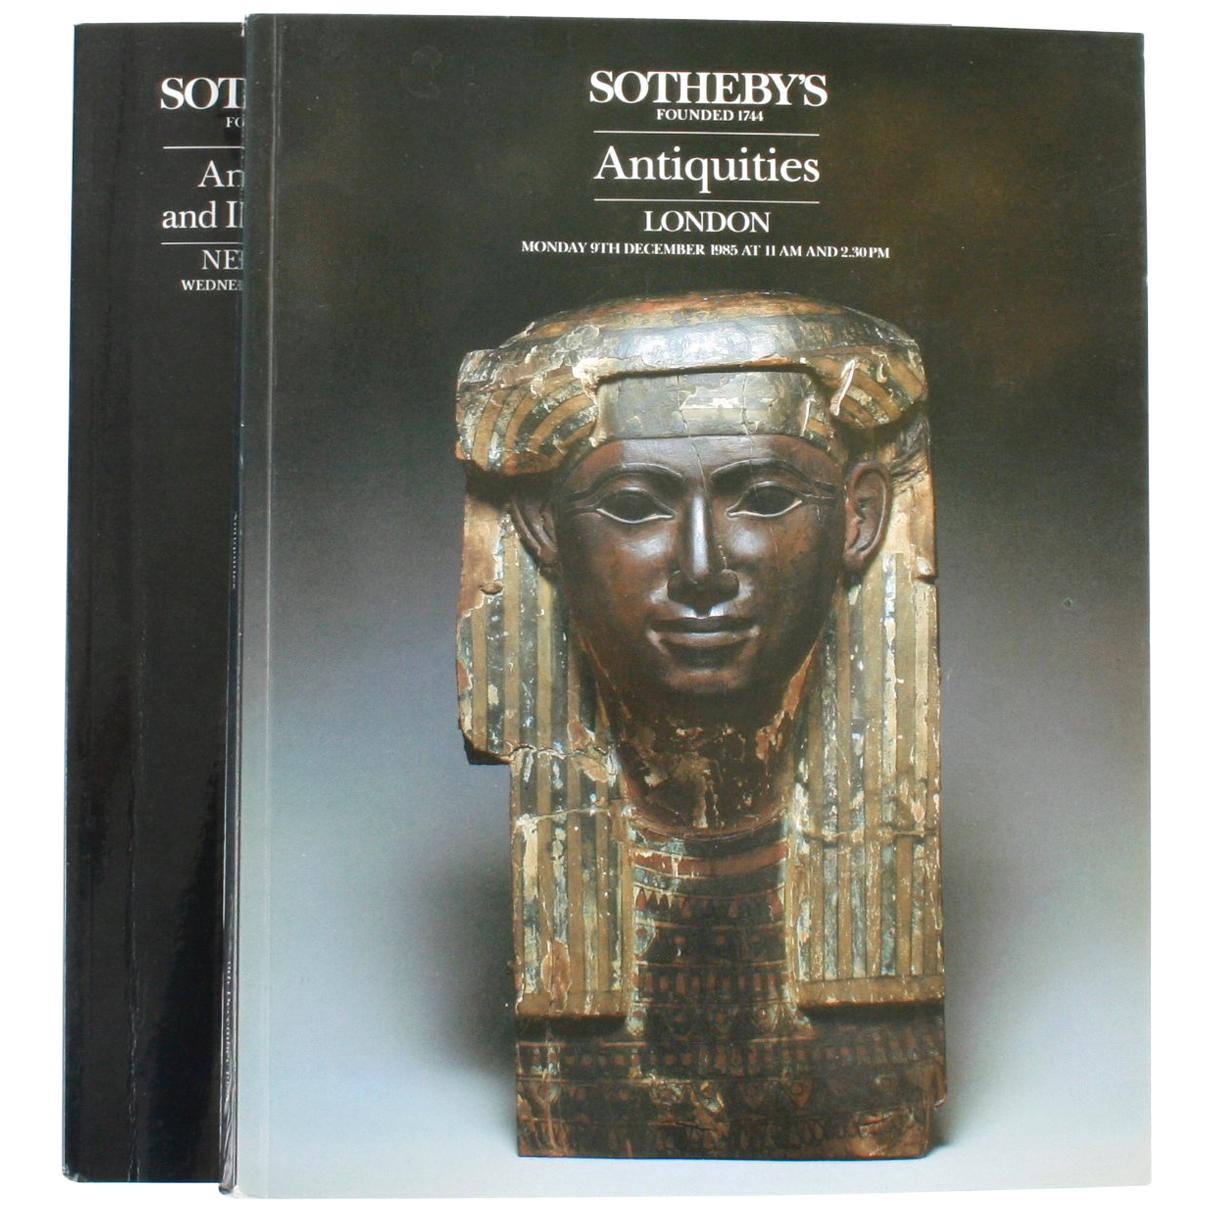 Pair of Sotheby's Catalogues on Antiquities and Islamic Art